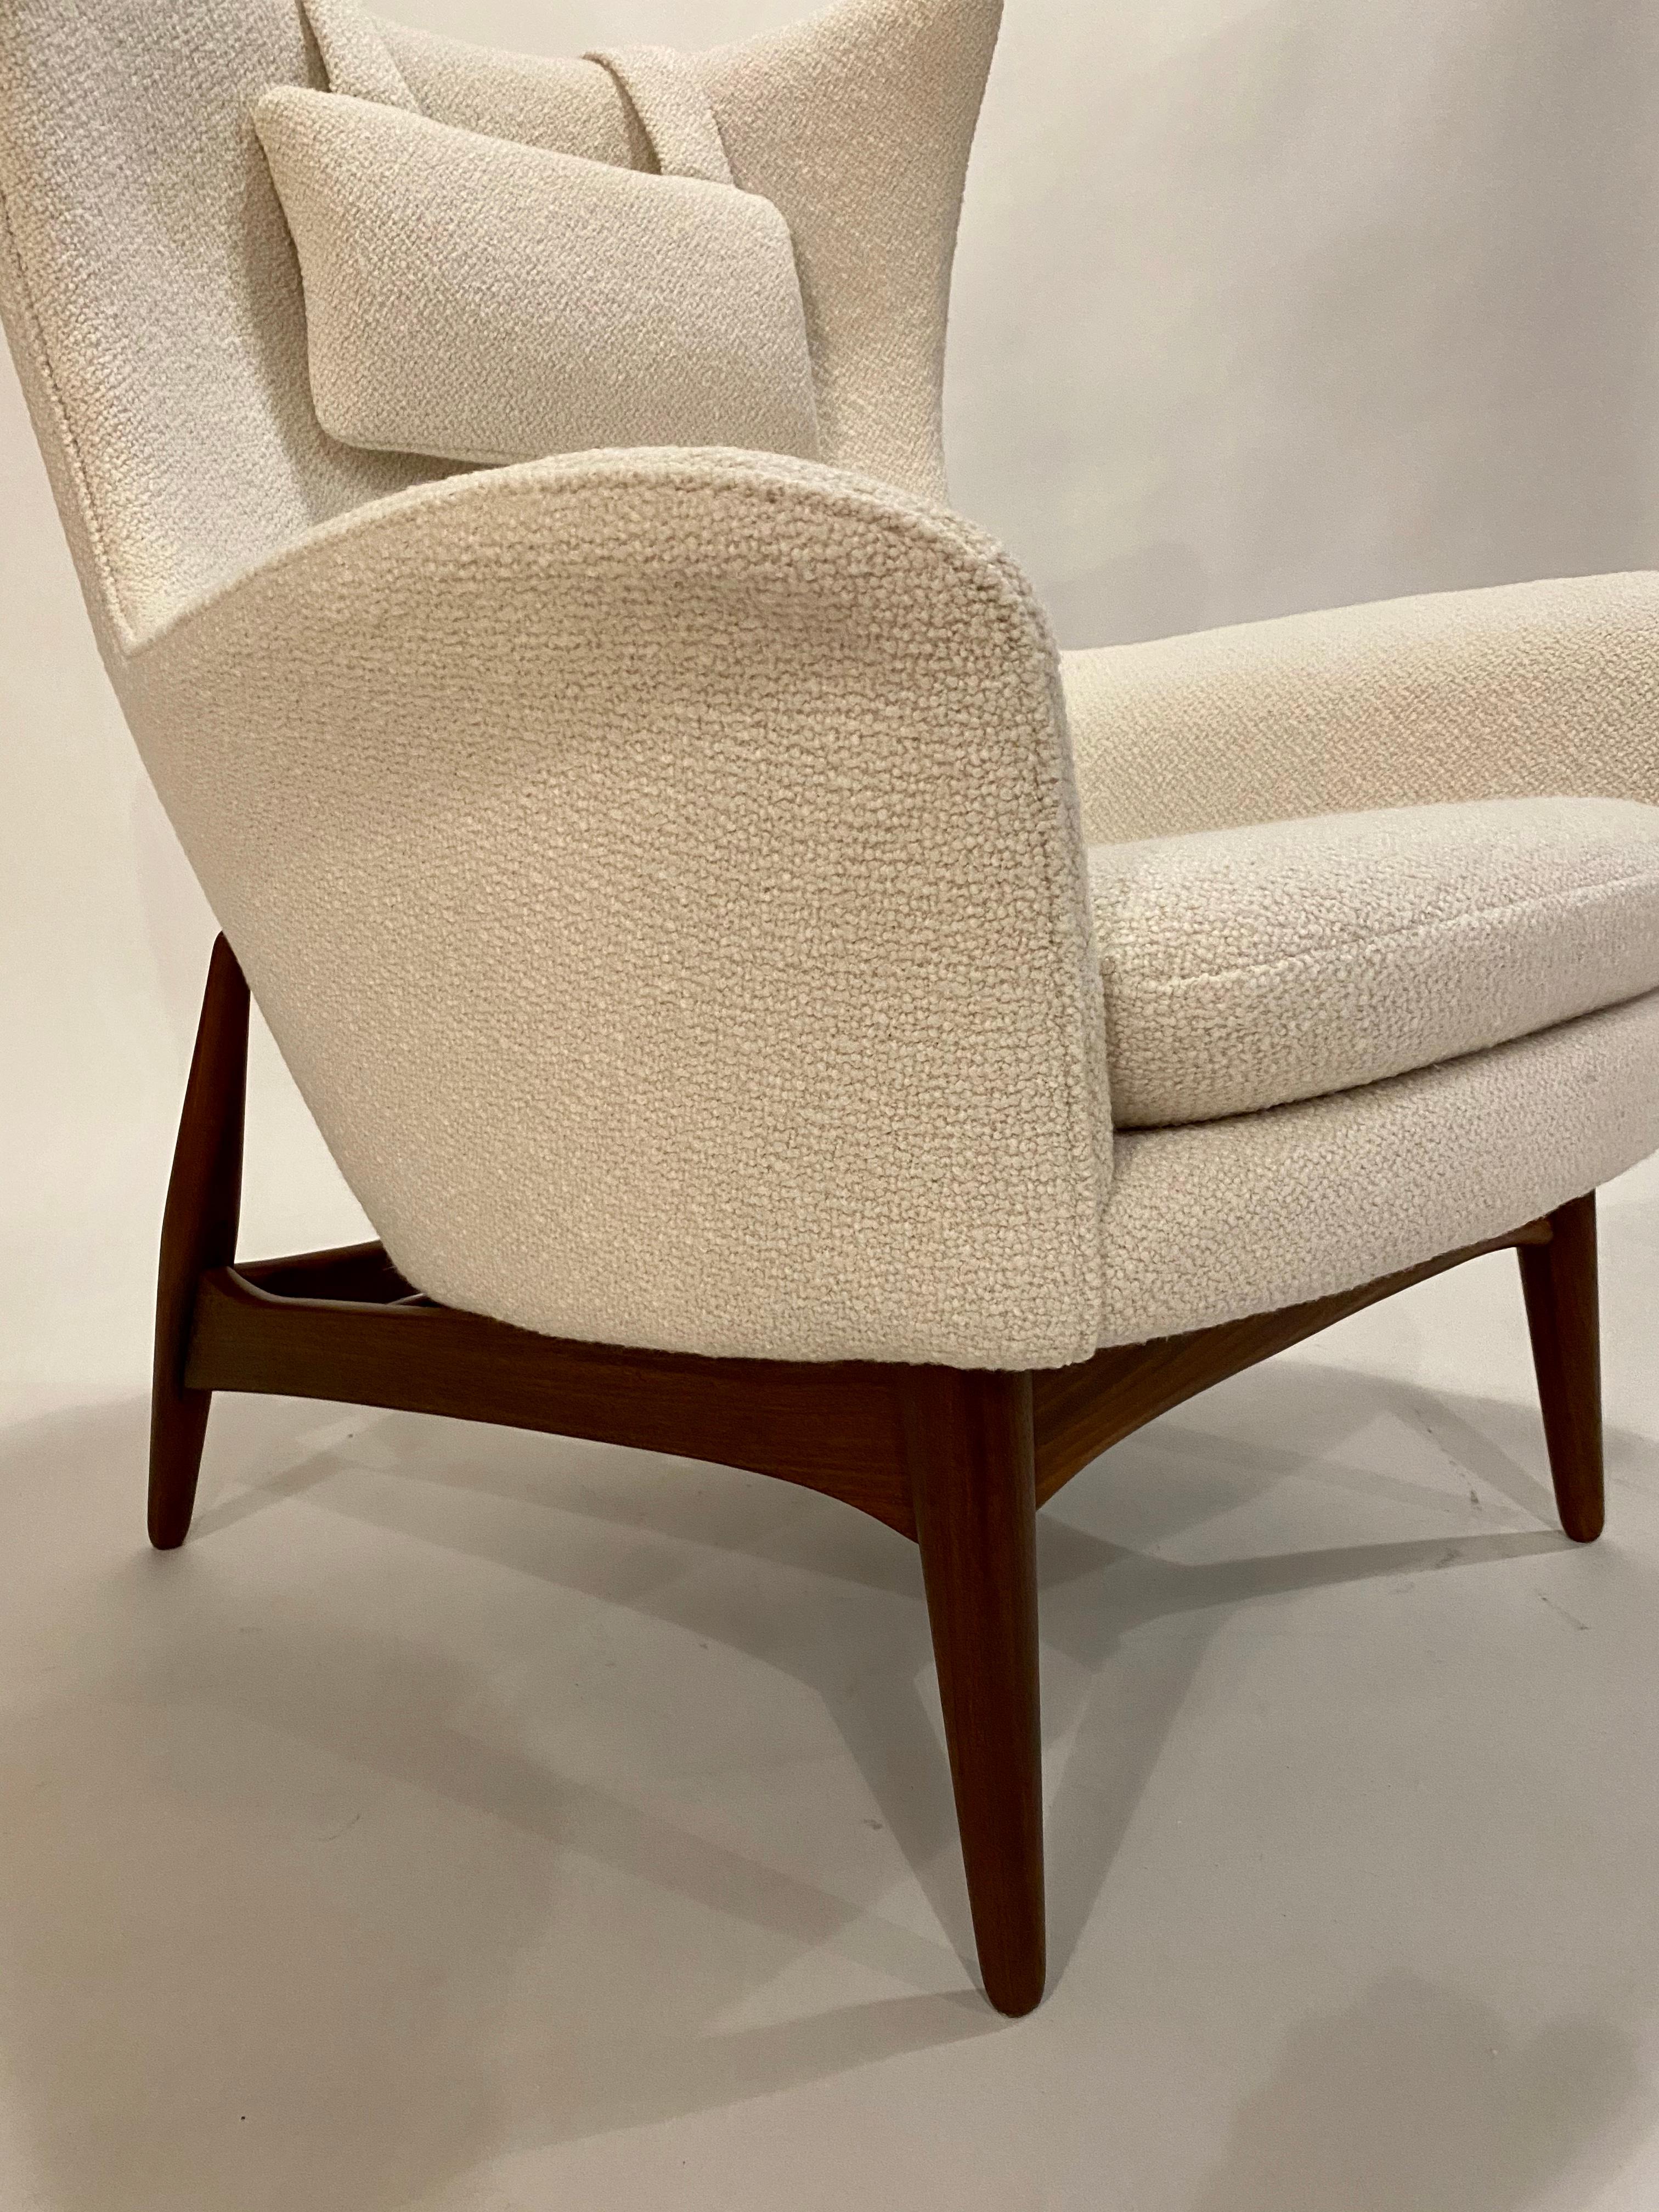 Mid-20th Century H.W. Klein Wing Chair for Bramin Mobler